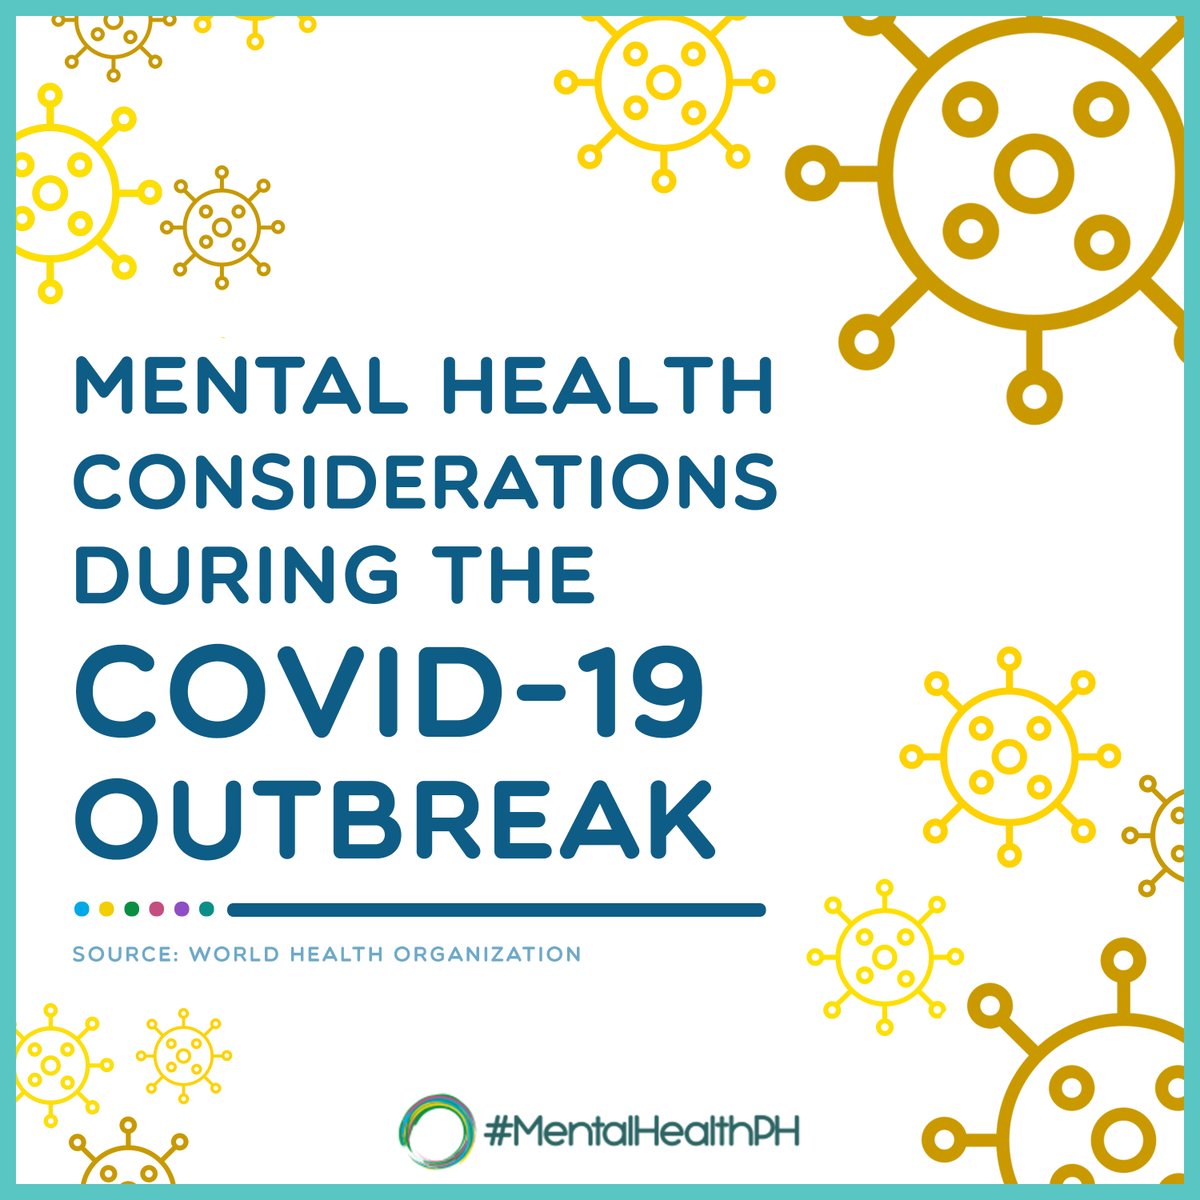 LOOK |  @WHO ’s mental health considerations as support for mental and psychological well-being during the COVID-19 outbreak.  #MentalHealthPH  #COVID19